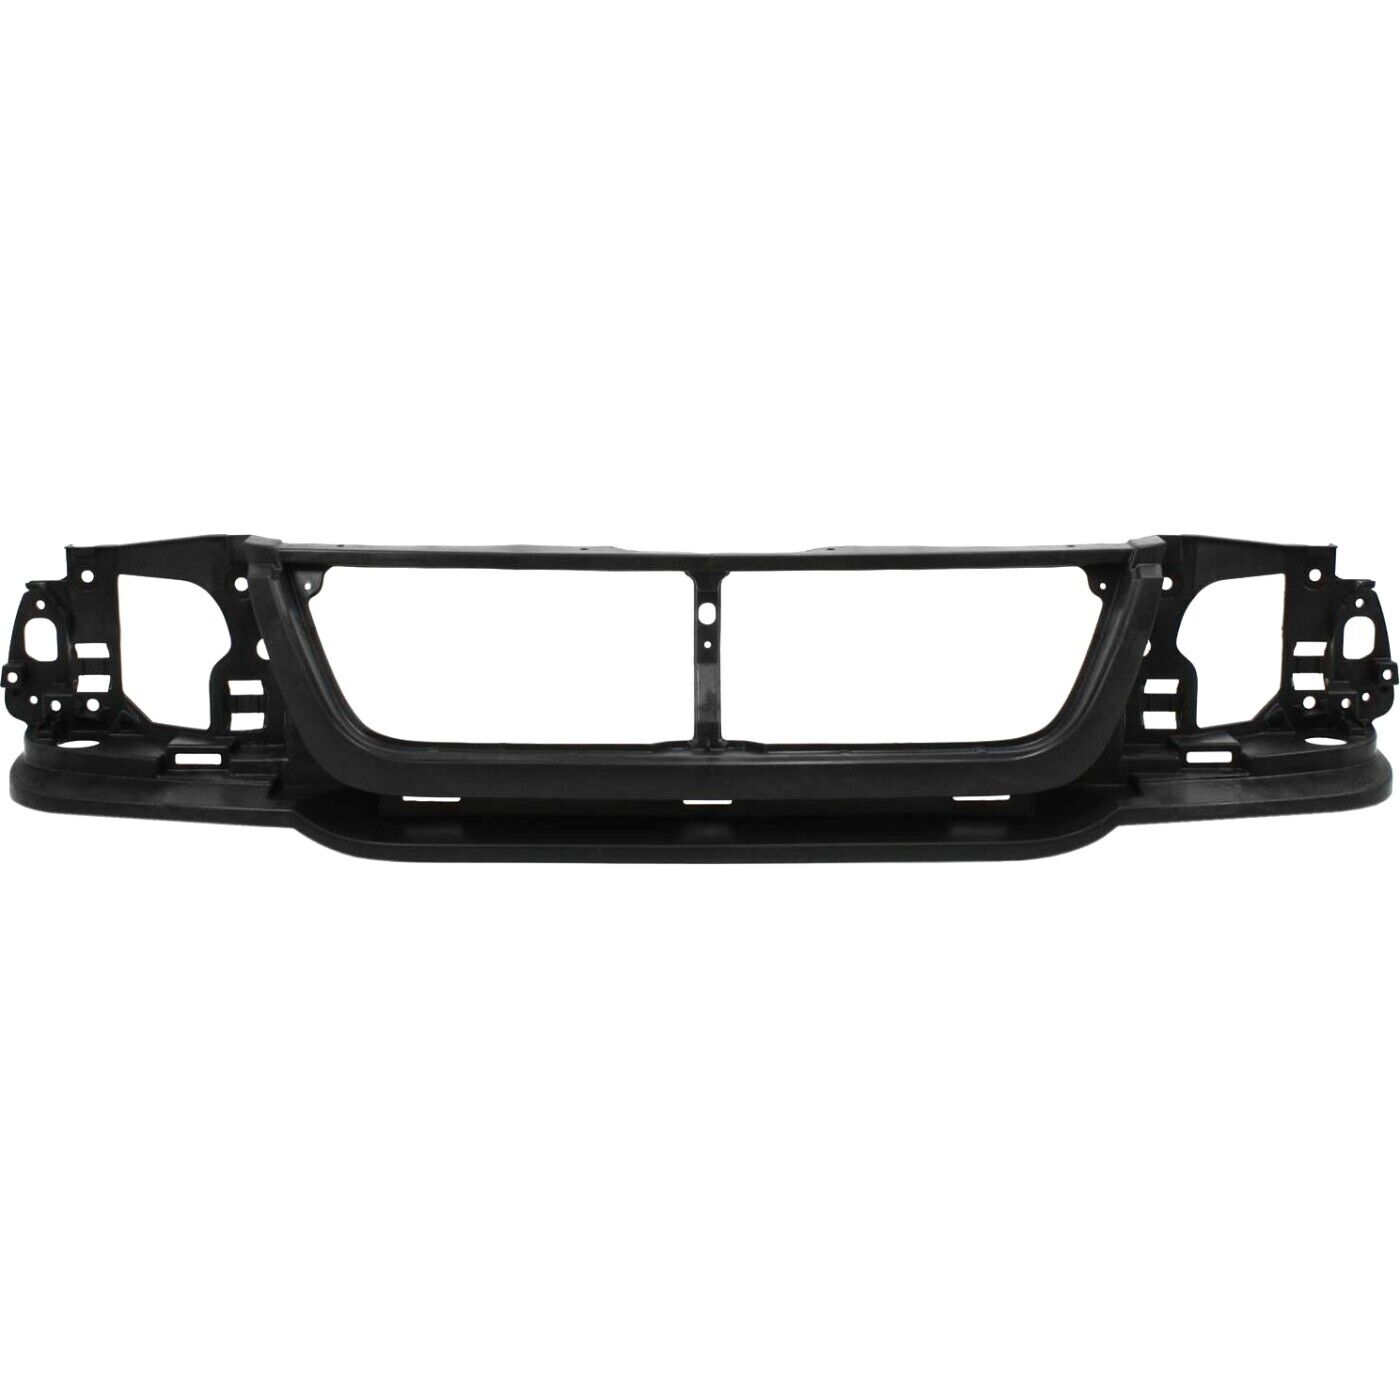 Header Panel For 2002-05 Ford Explorer Grille Opening Panel Thermoplastic